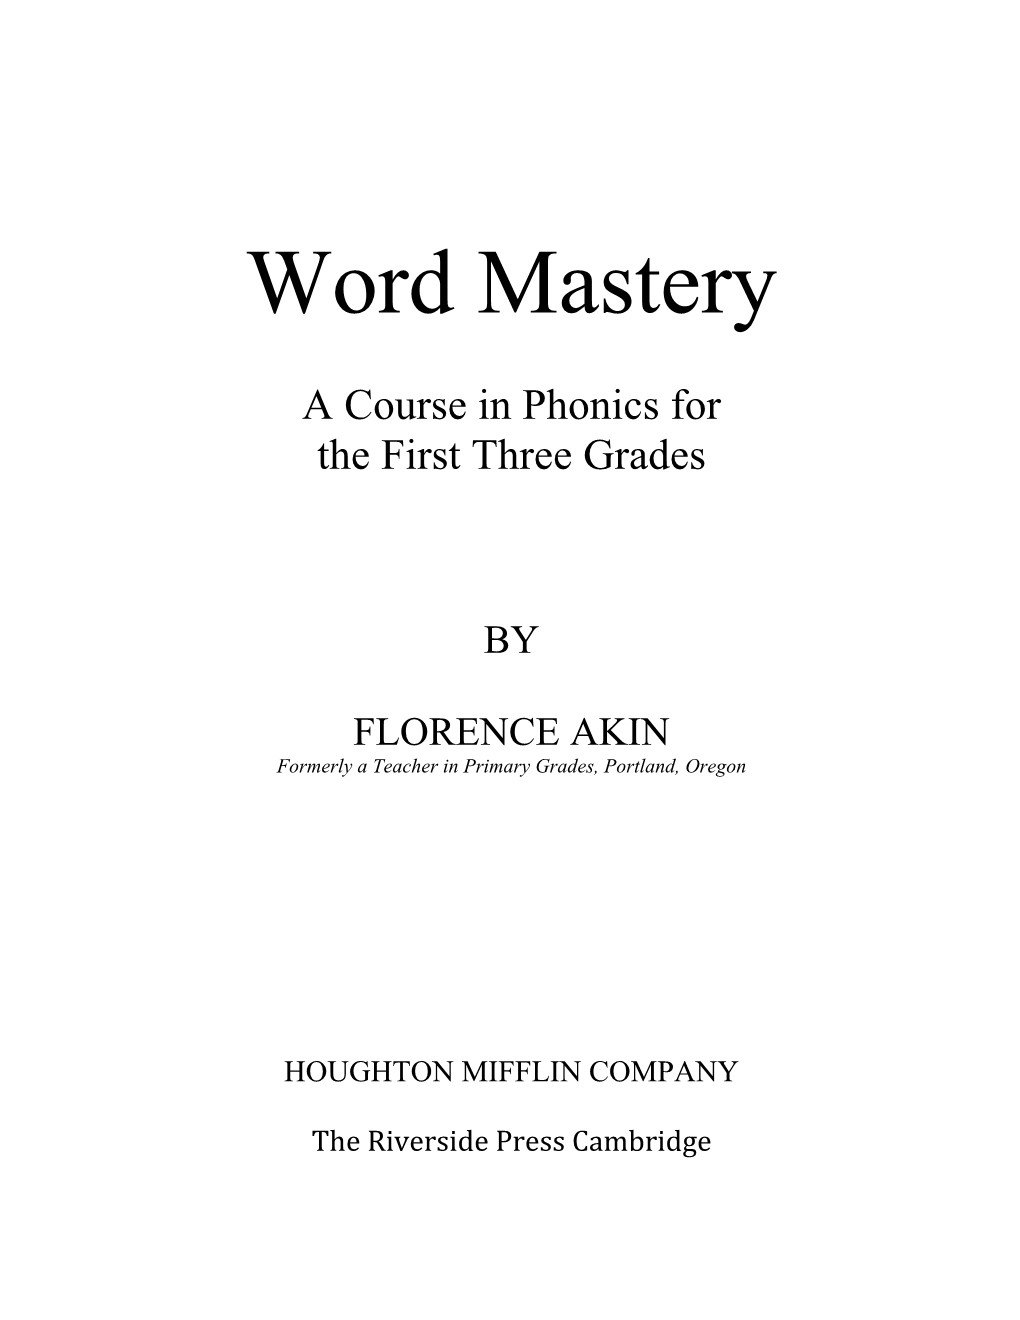 Word Mastery: a Course in Phonics for the First Three Grades